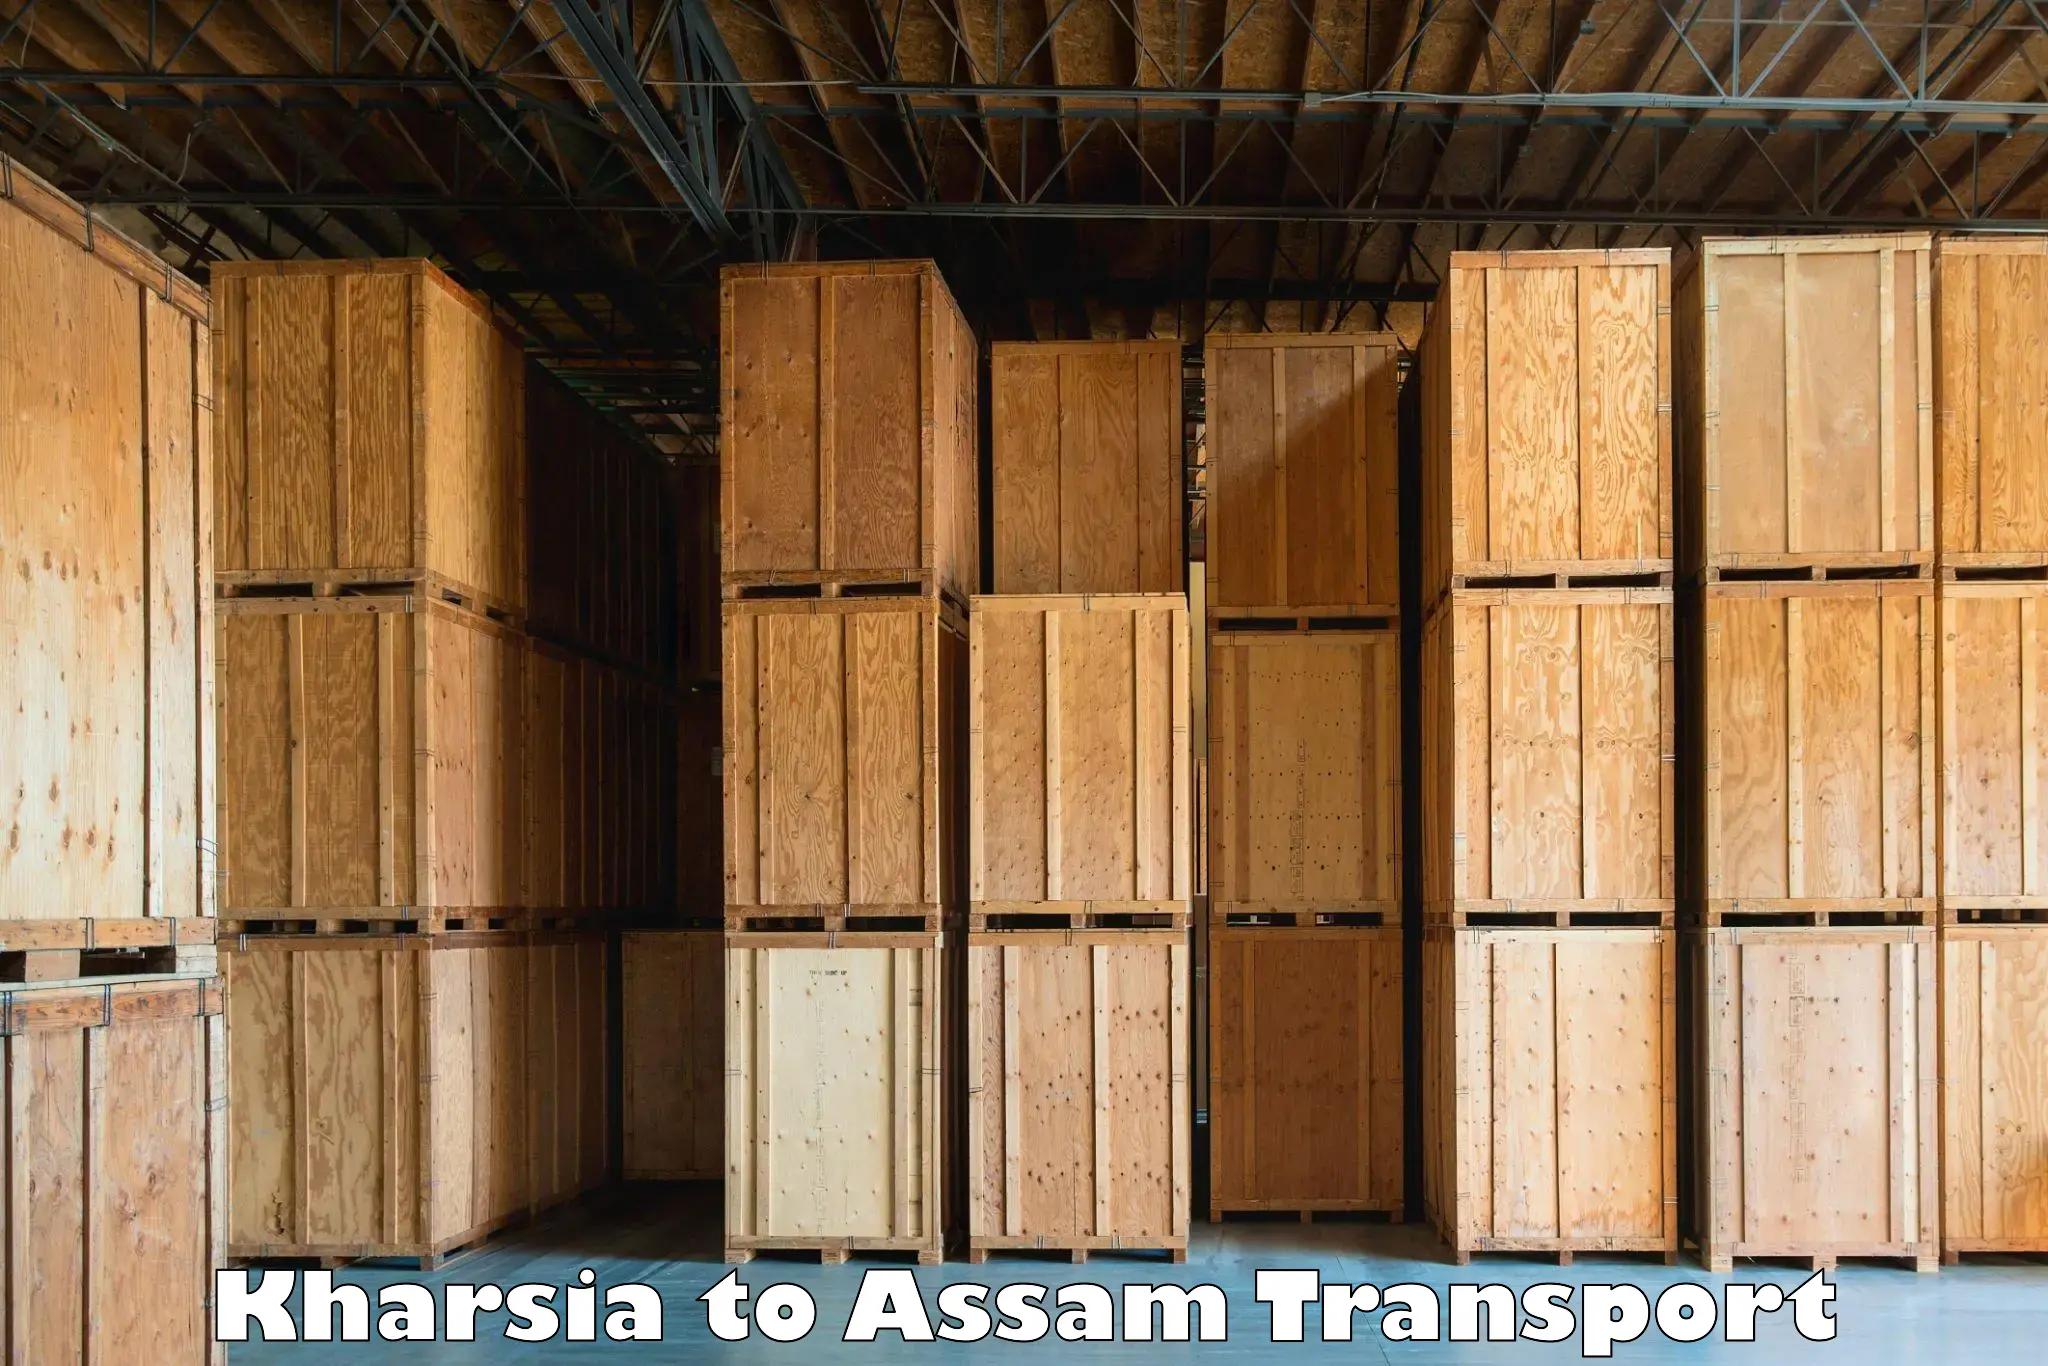 Truck transport companies in India Kharsia to Dergaon